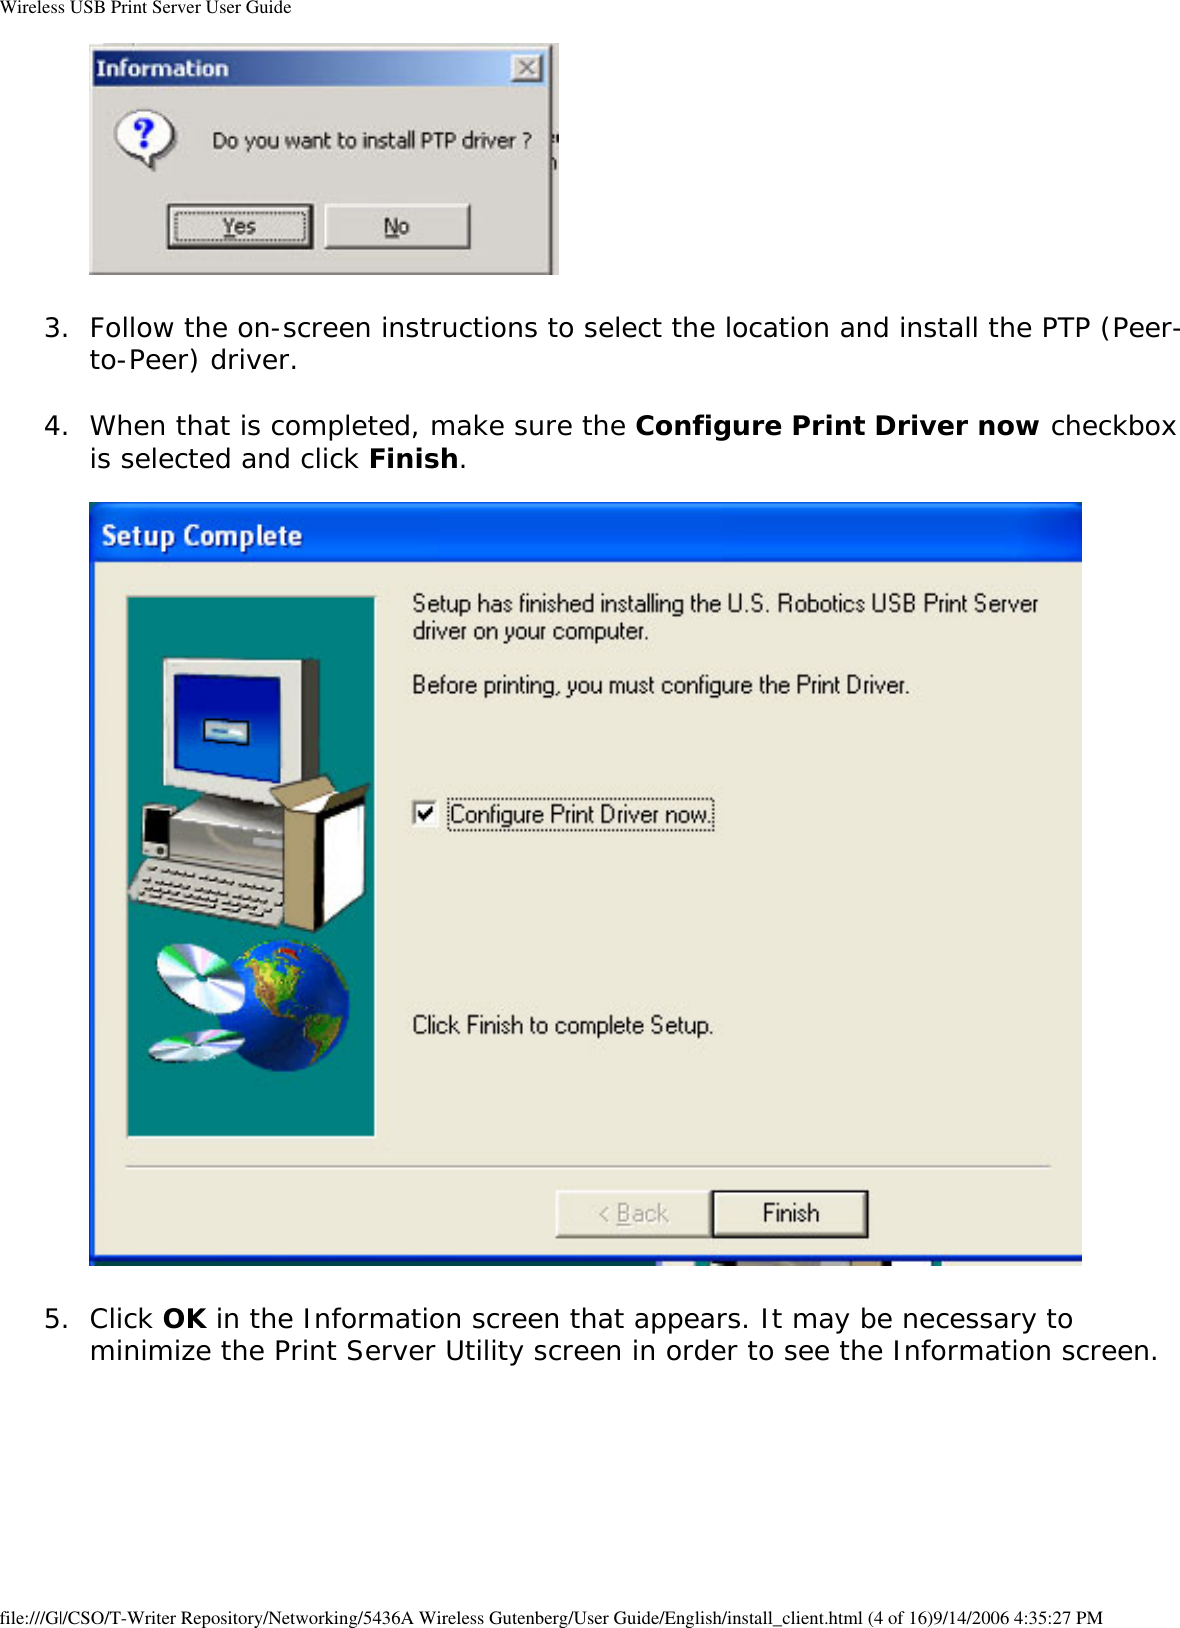 Wireless USB Print Server User Guide 3.  Follow the on-screen instructions to select the location and install the PTP (Peer-to-Peer) driver. 4.  When that is completed, make sure the Configure Print Driver now checkbox is selected and click Finish.   5.  Click OK in the Information screen that appears. It may be necessary to minimize the Print Server Utility screen in order to see the Information screen.  file:///G|/CSO/T-Writer Repository/Networking/5436A Wireless Gutenberg/User Guide/English/install_client.html (4 of 16)9/14/2006 4:35:27 PM